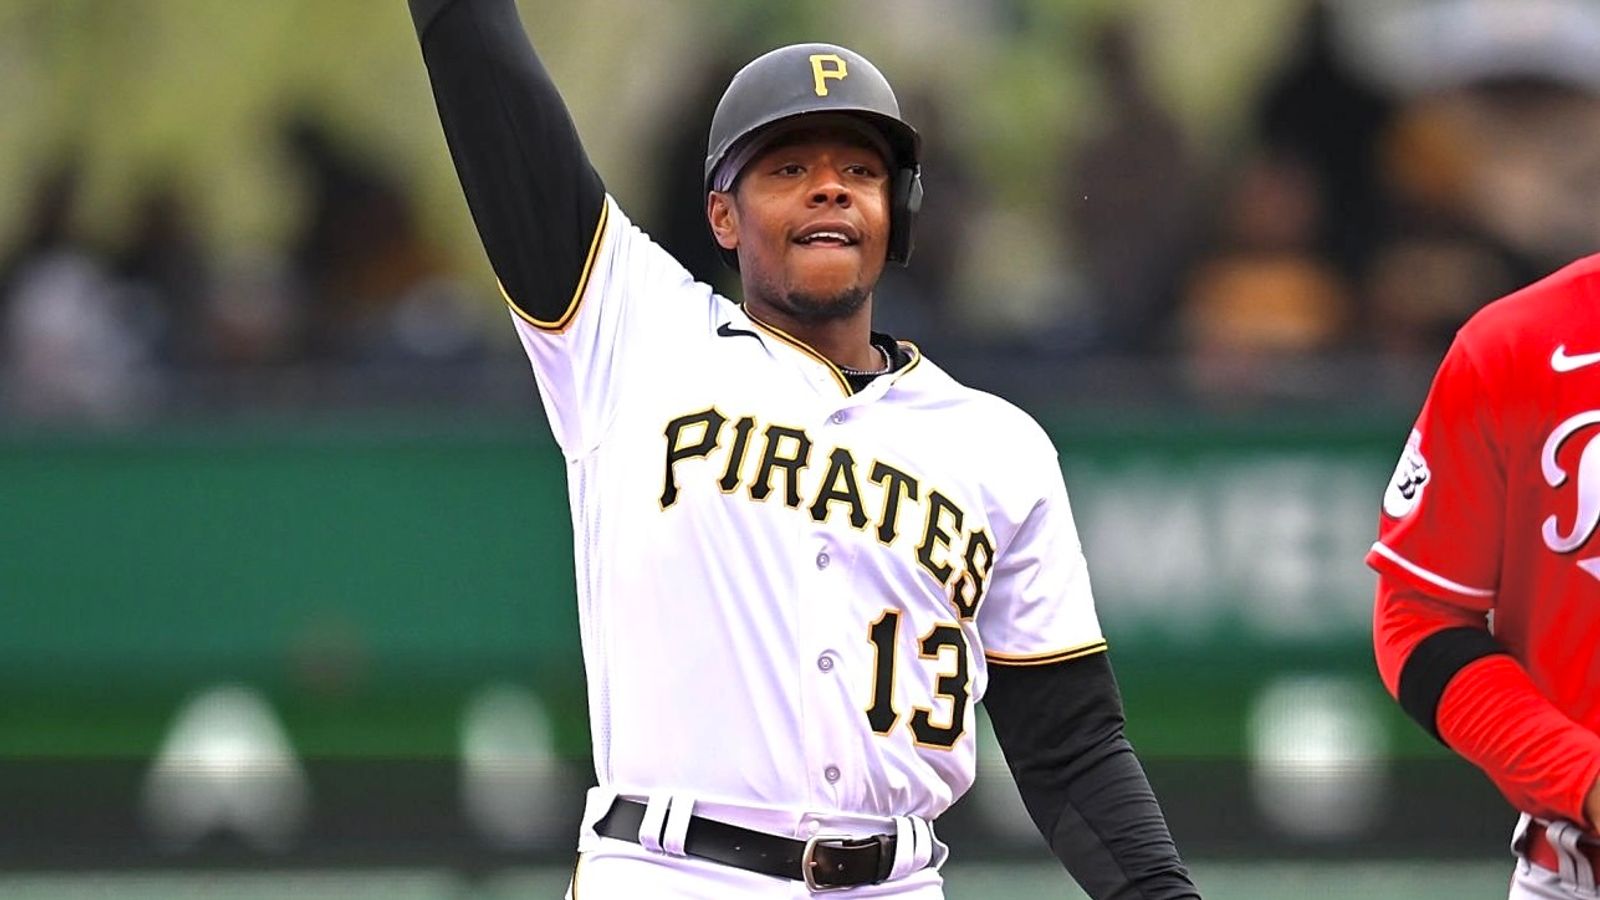 Pirates Freeze Frame: Ke'Bryan Hayes provides more impact from